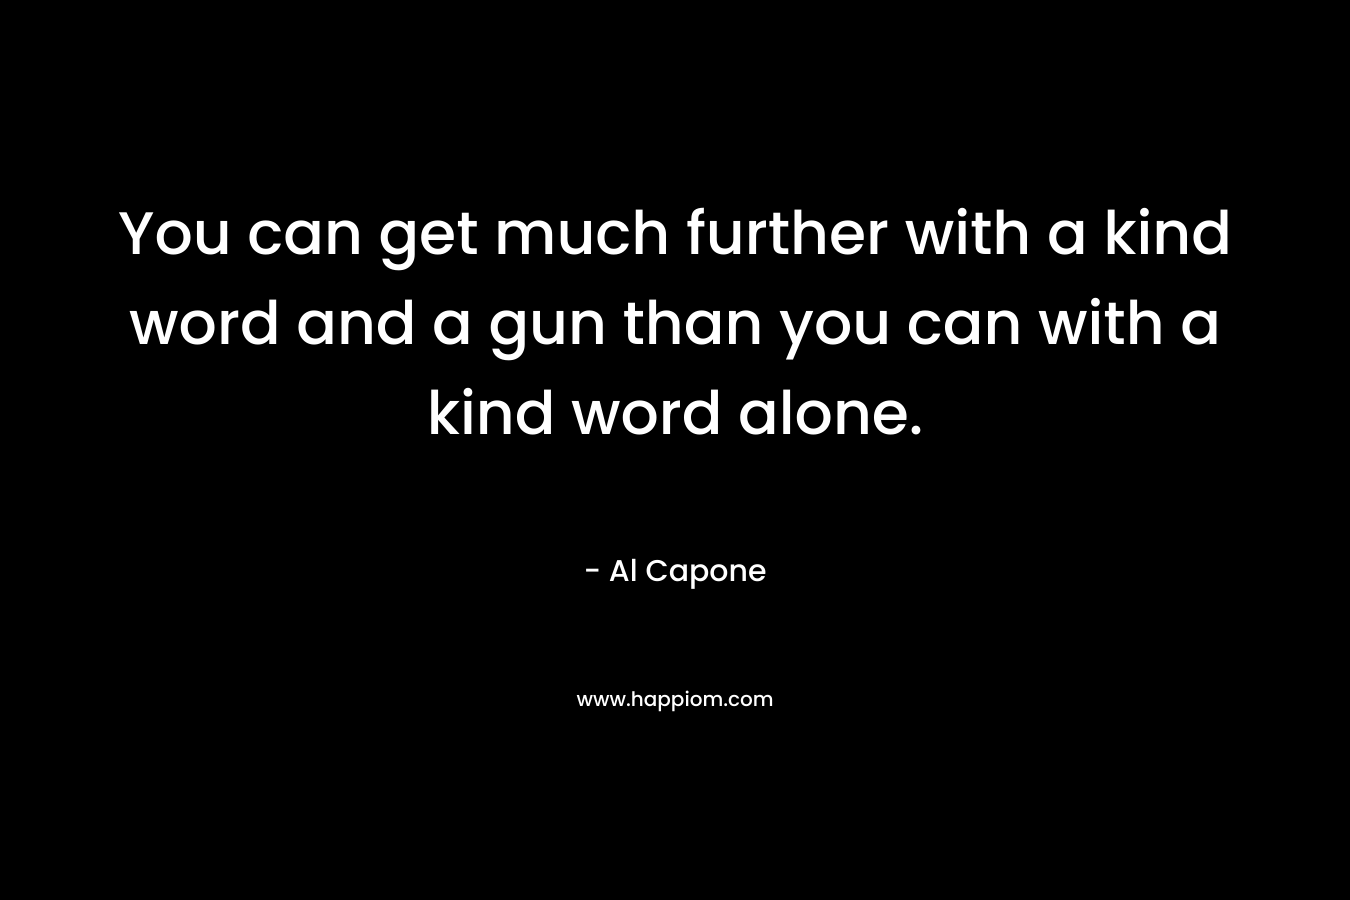 You can get much further with a kind word and a gun than you can with a kind word alone. – Al Capone